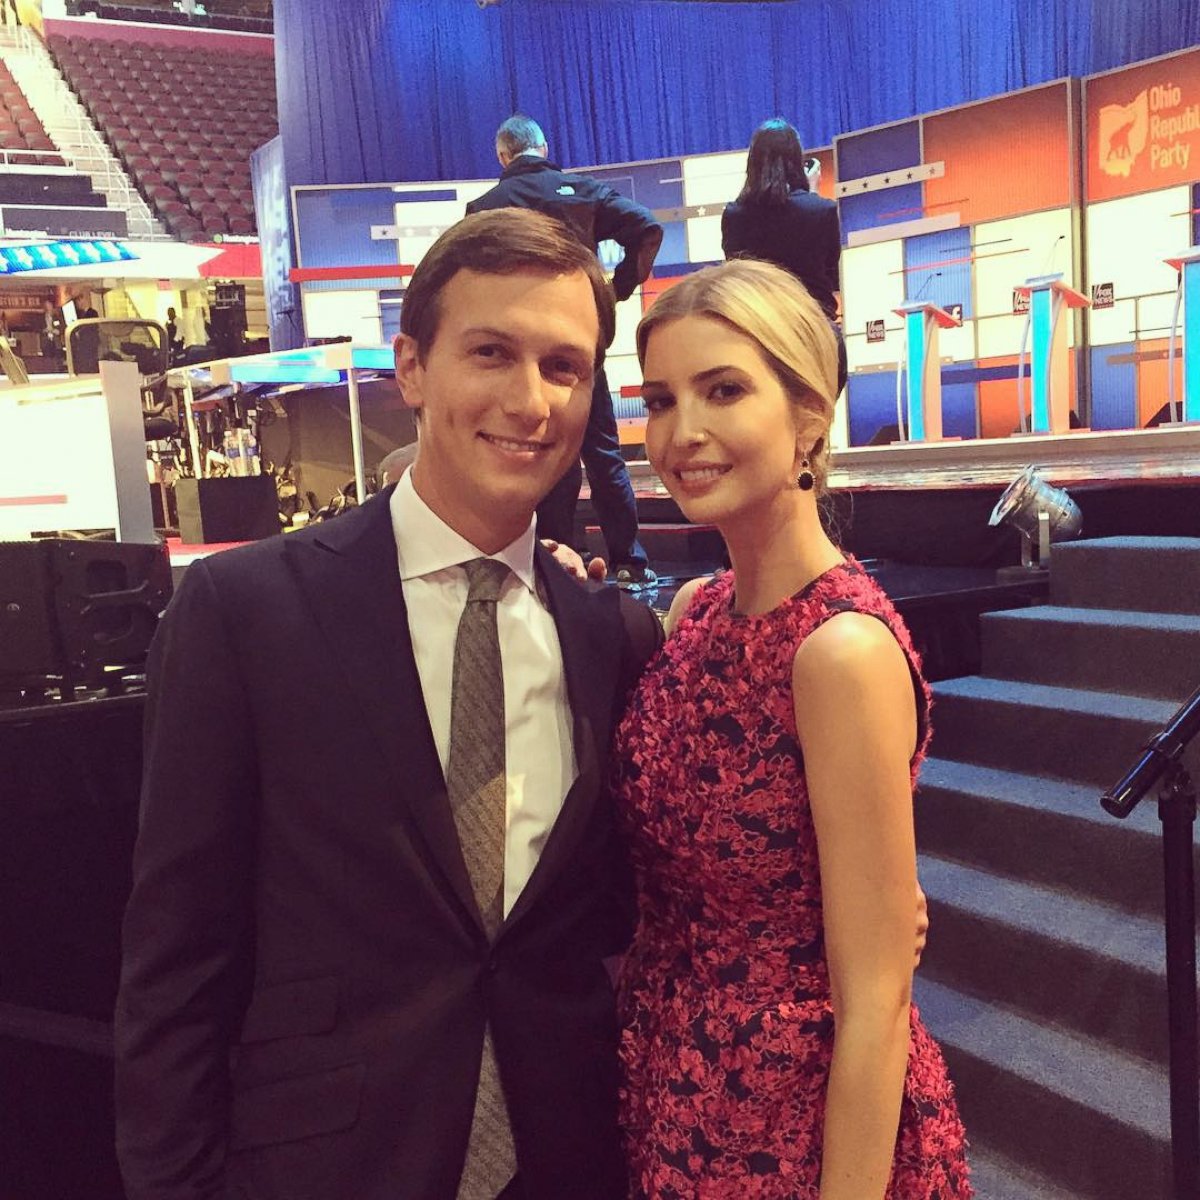 PHOTO: Ivanka Trump posted this photo with the caption "At the #GOPdebate in support of my amazing father. I am very proud of you! #makeamericagreatagain"